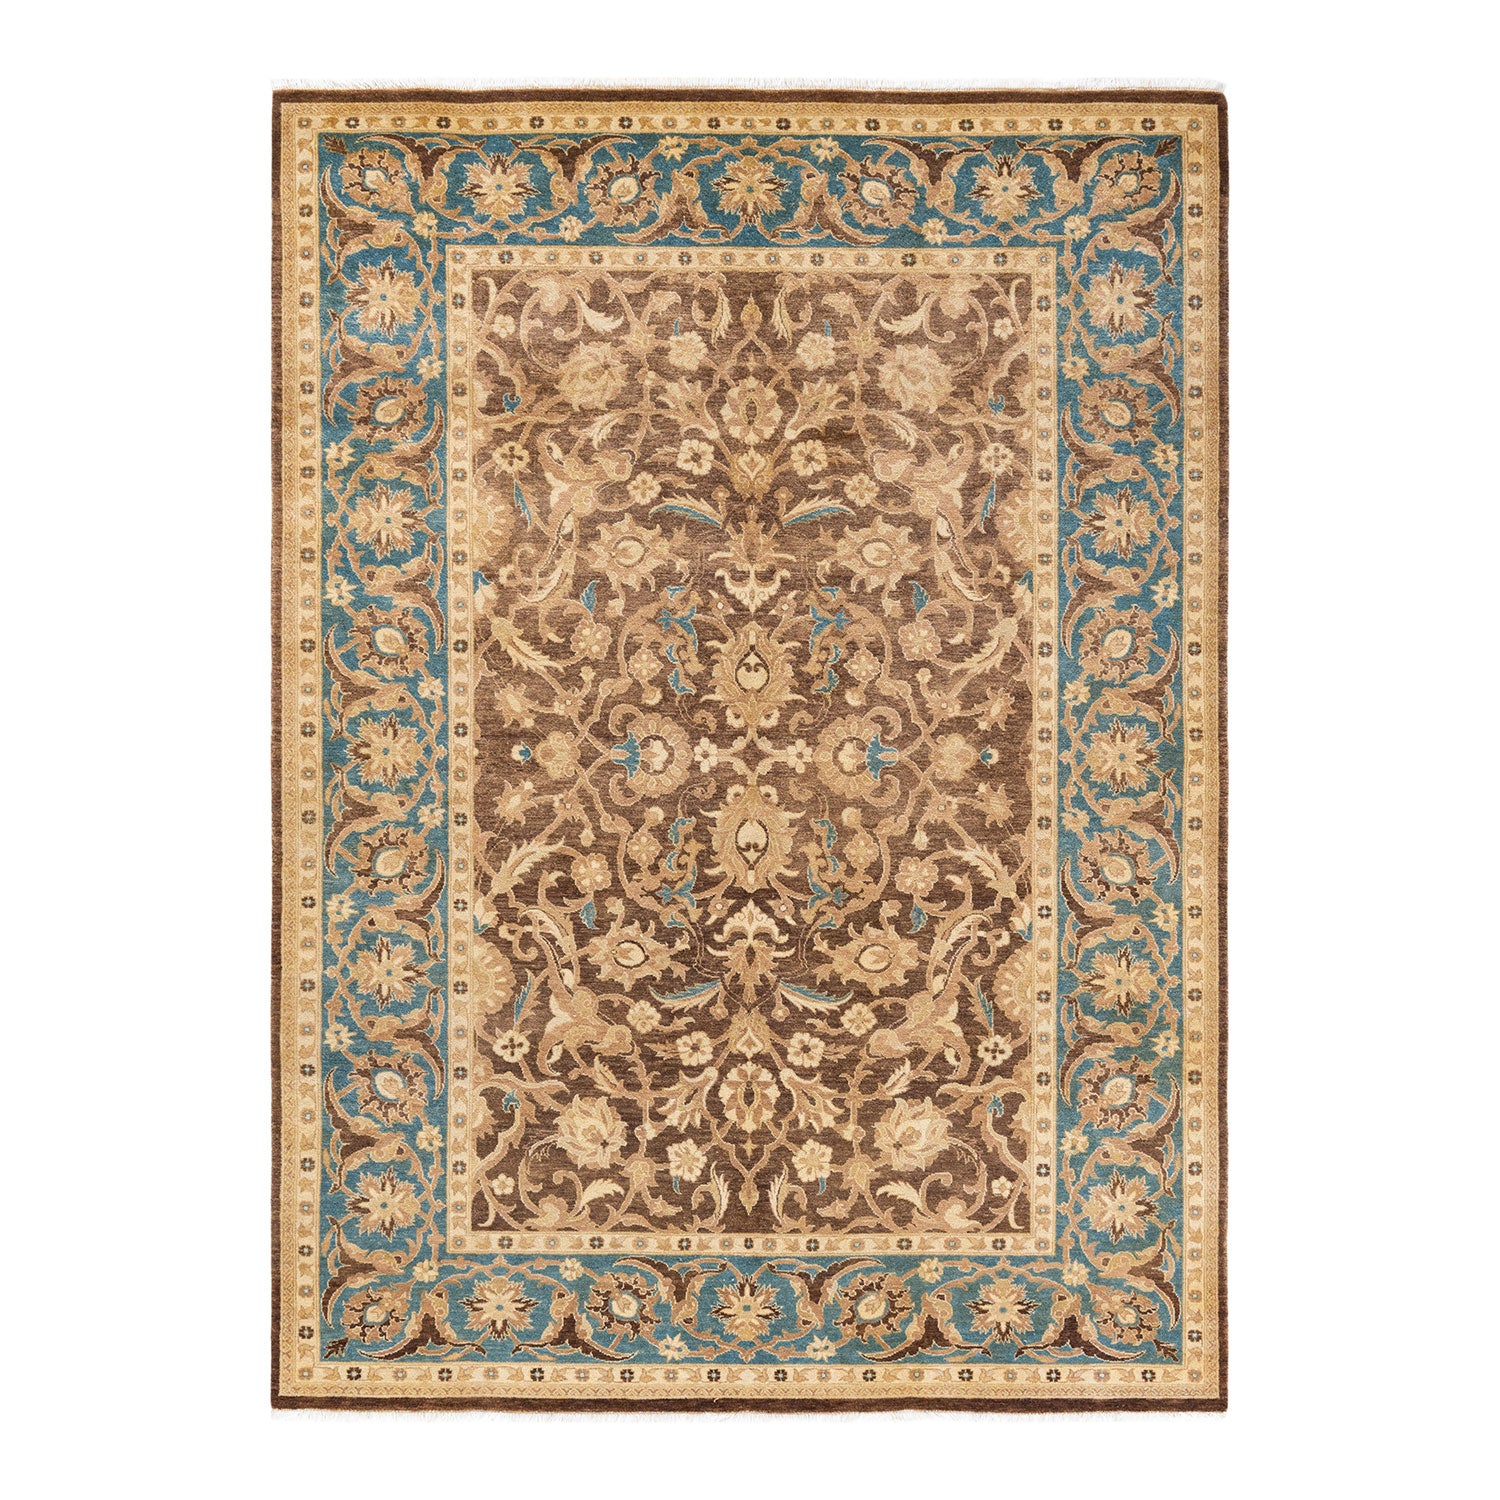 Exquisite hand-knotted rectangular oriental rug with intricate floral motifs